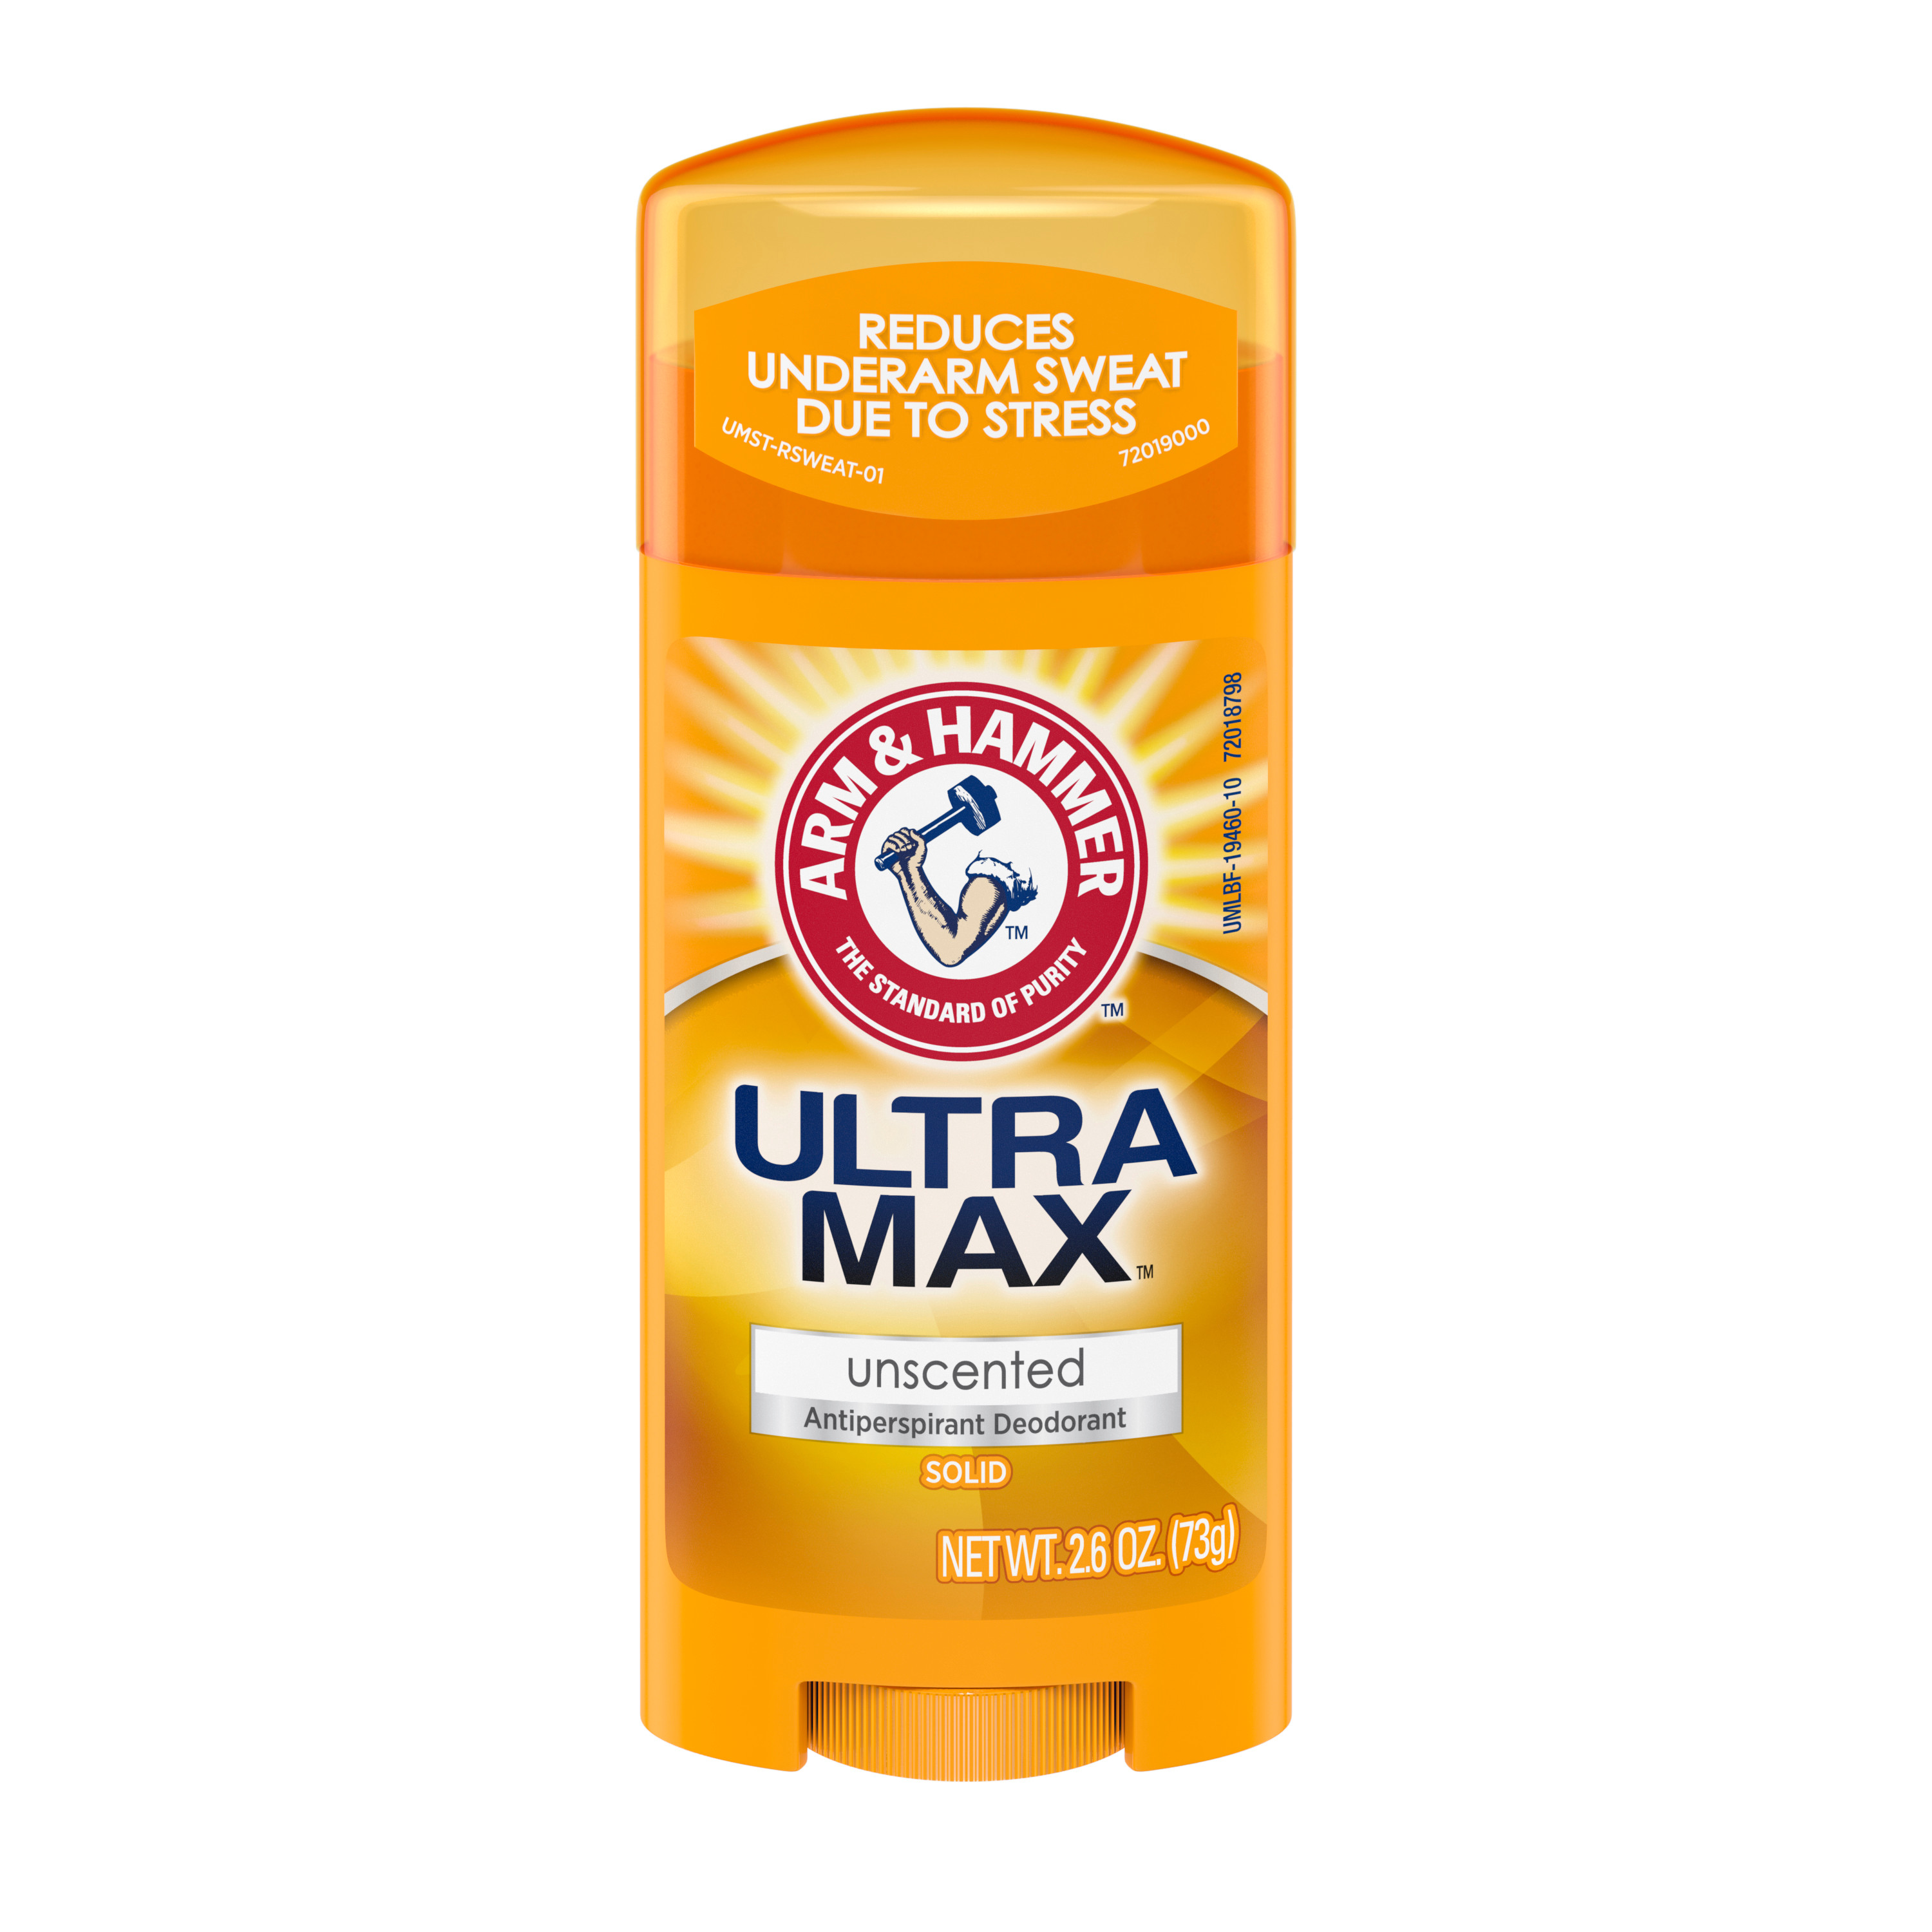 Arm & Hammer ULTRA MAX Solid Antiperspirant Deodorant, Unscented, 2.6 oz. - image 1 of 6